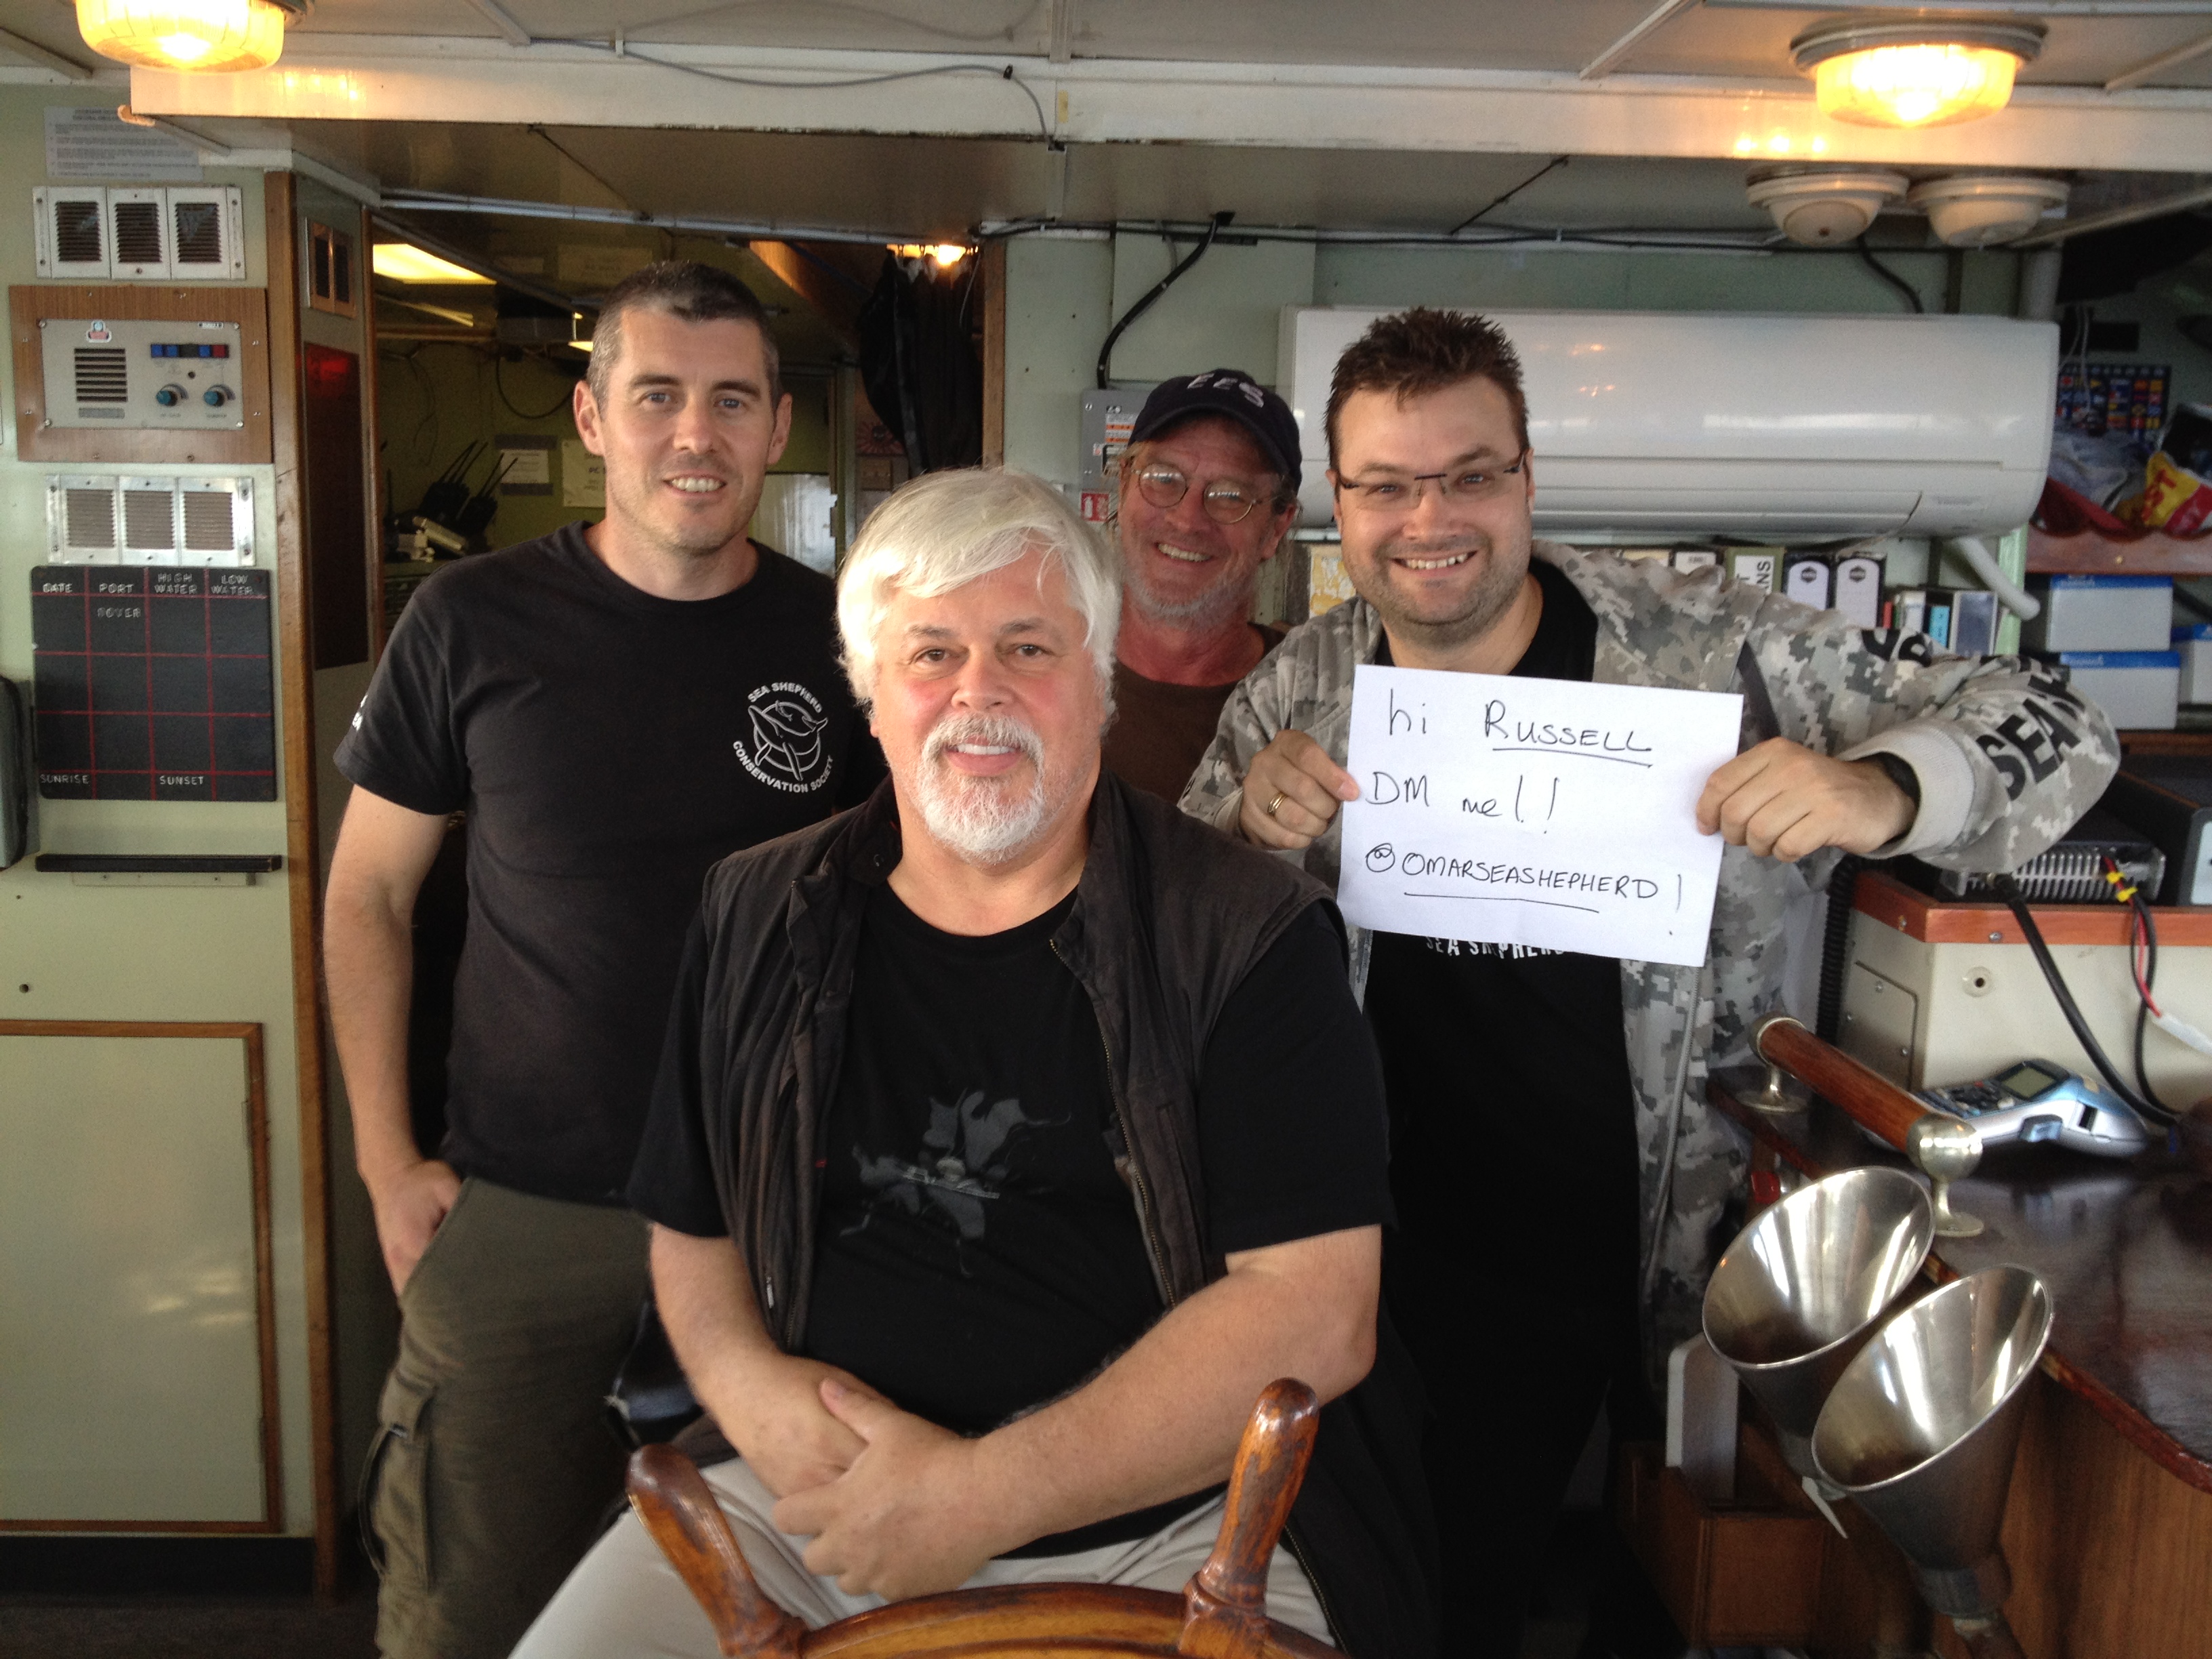 On the bridge of the Steve Irwin with Australian Director Jeff Hansen, Captain Paul Watson, Legend Peter Brown and myself holding a sign up to Russell Crowe to prove who we are.